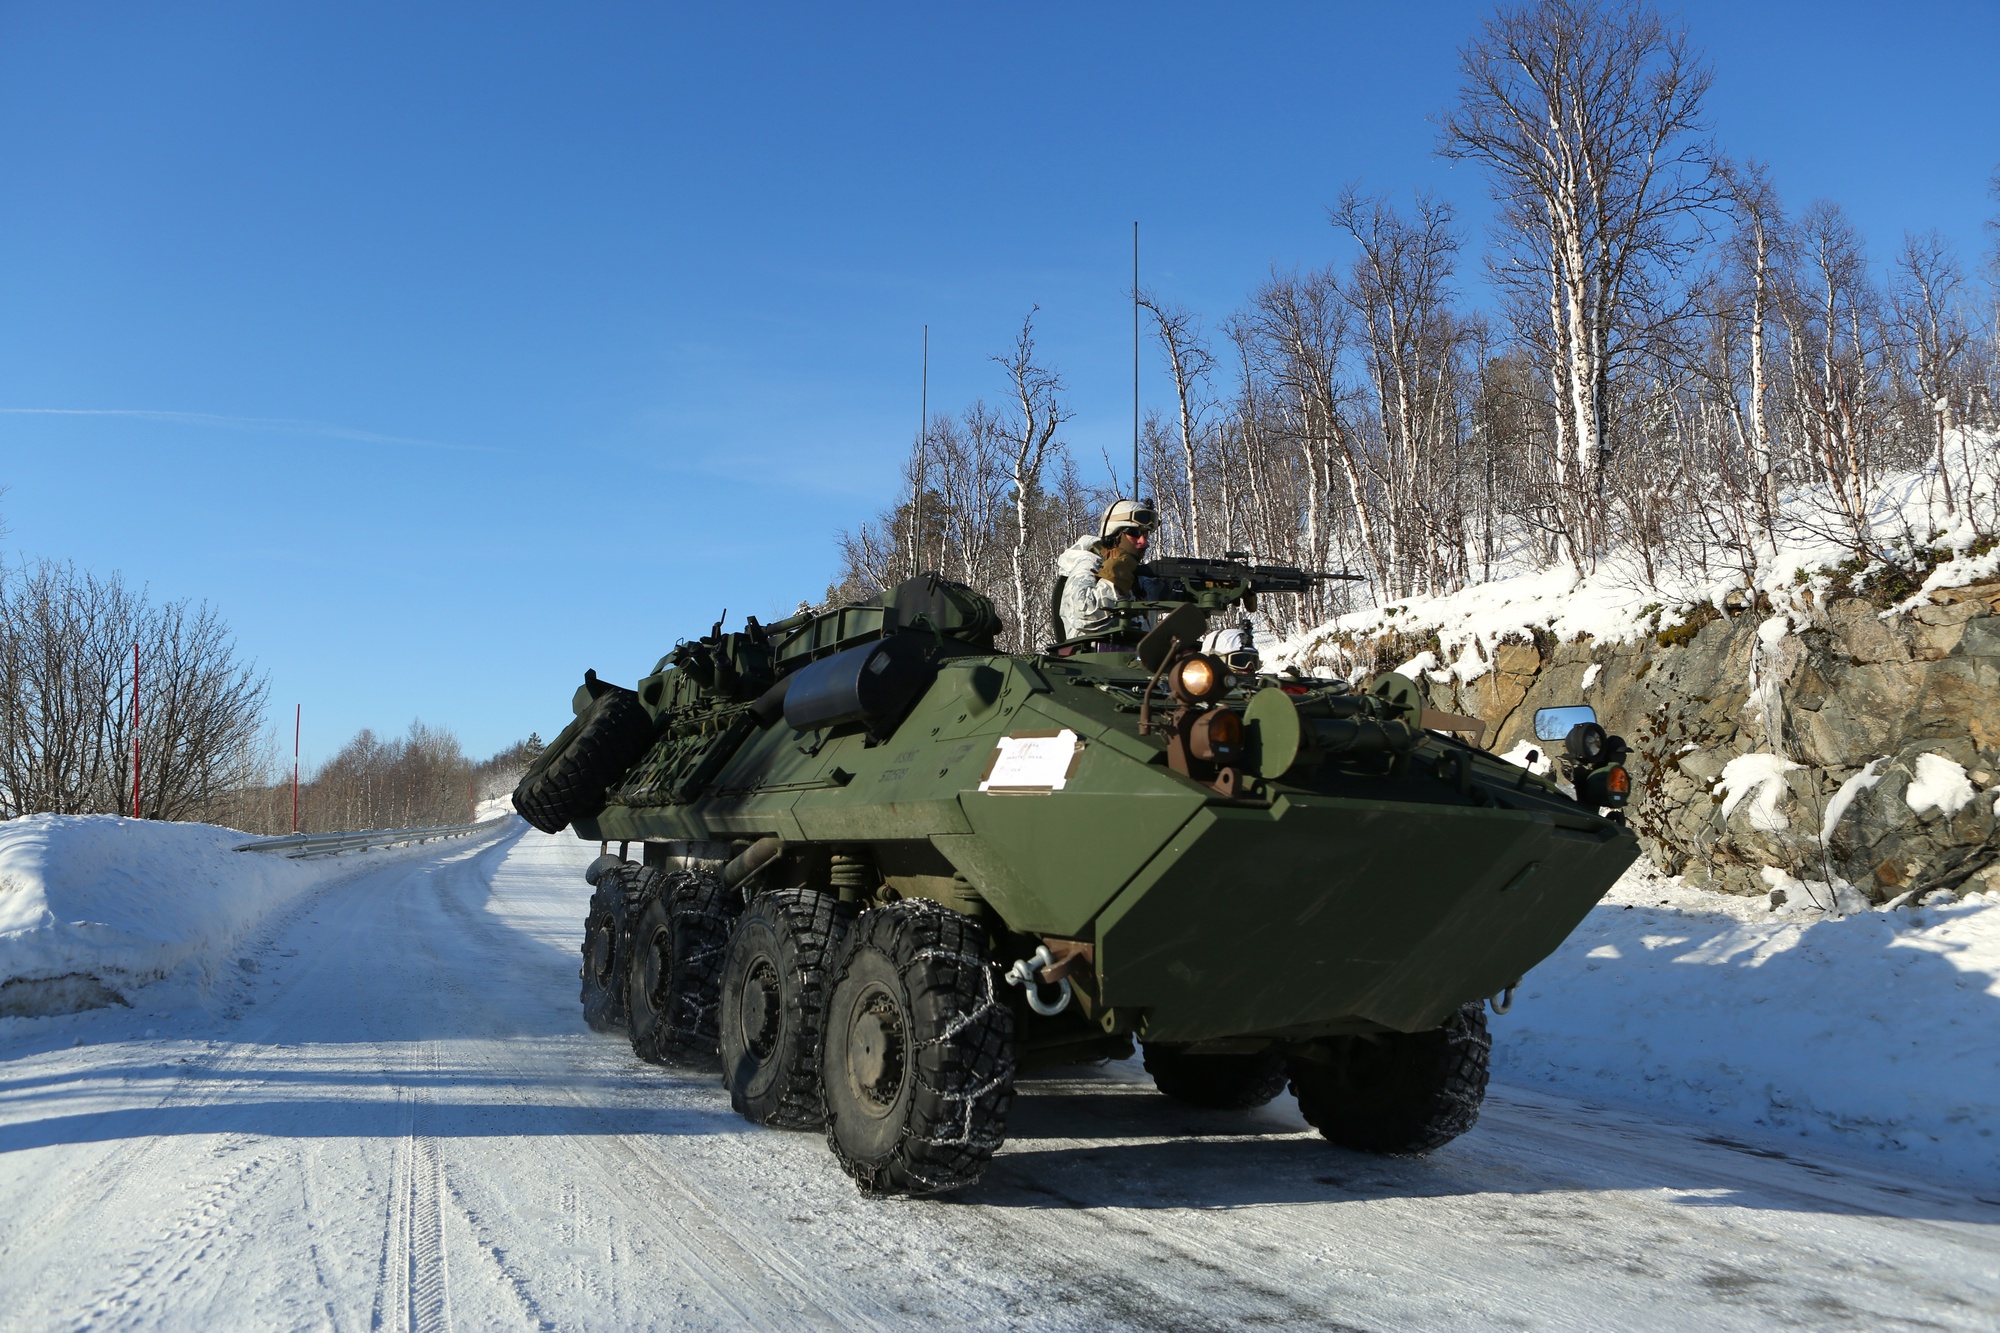 Images - LAV in Norway [Image 4 of 4] - DVIDS